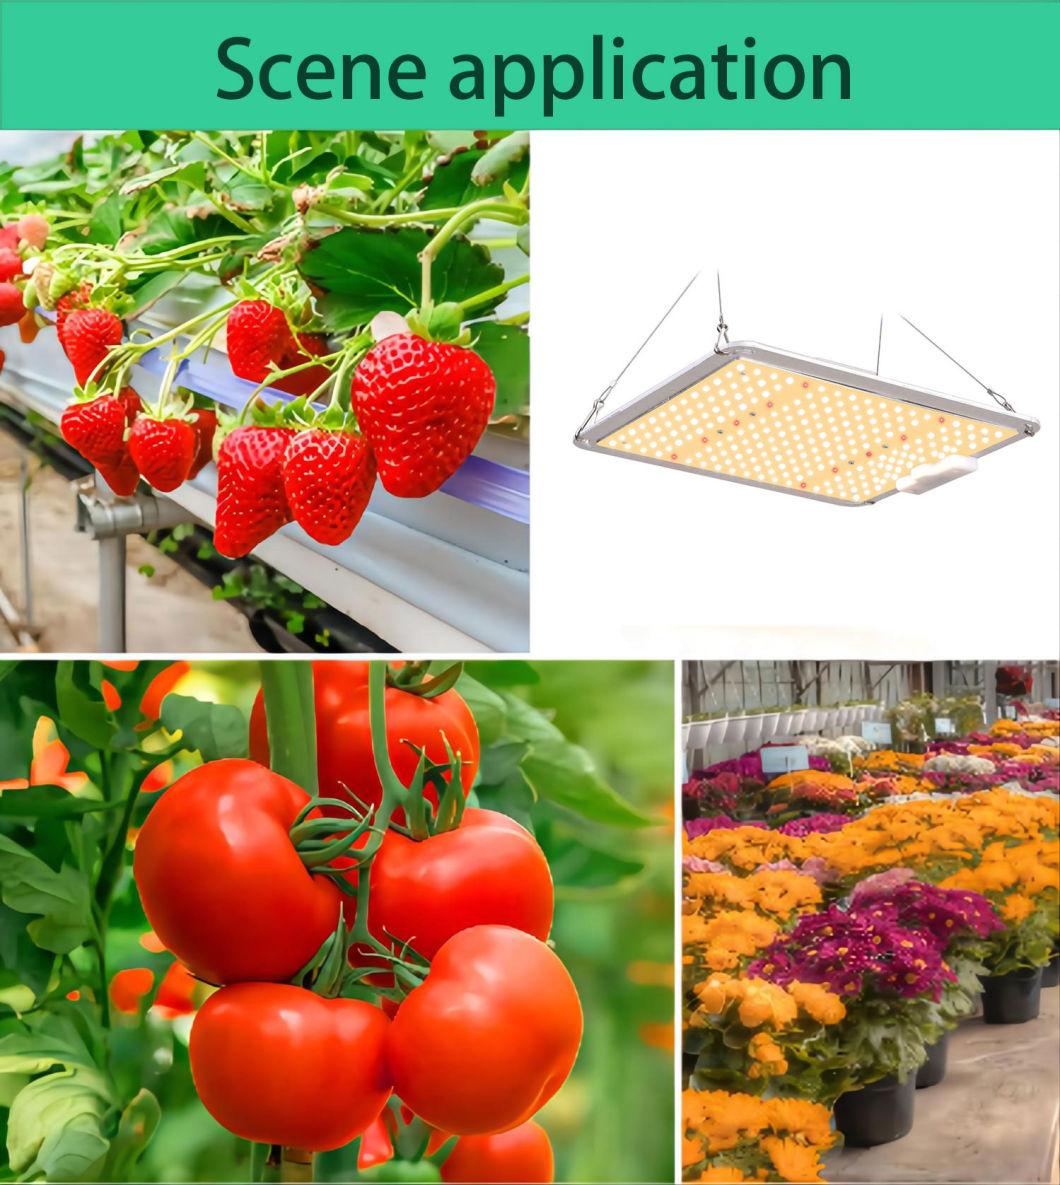 Good Service in Greenhouse LED Growth Light with UL Certification 3 Years Warranty